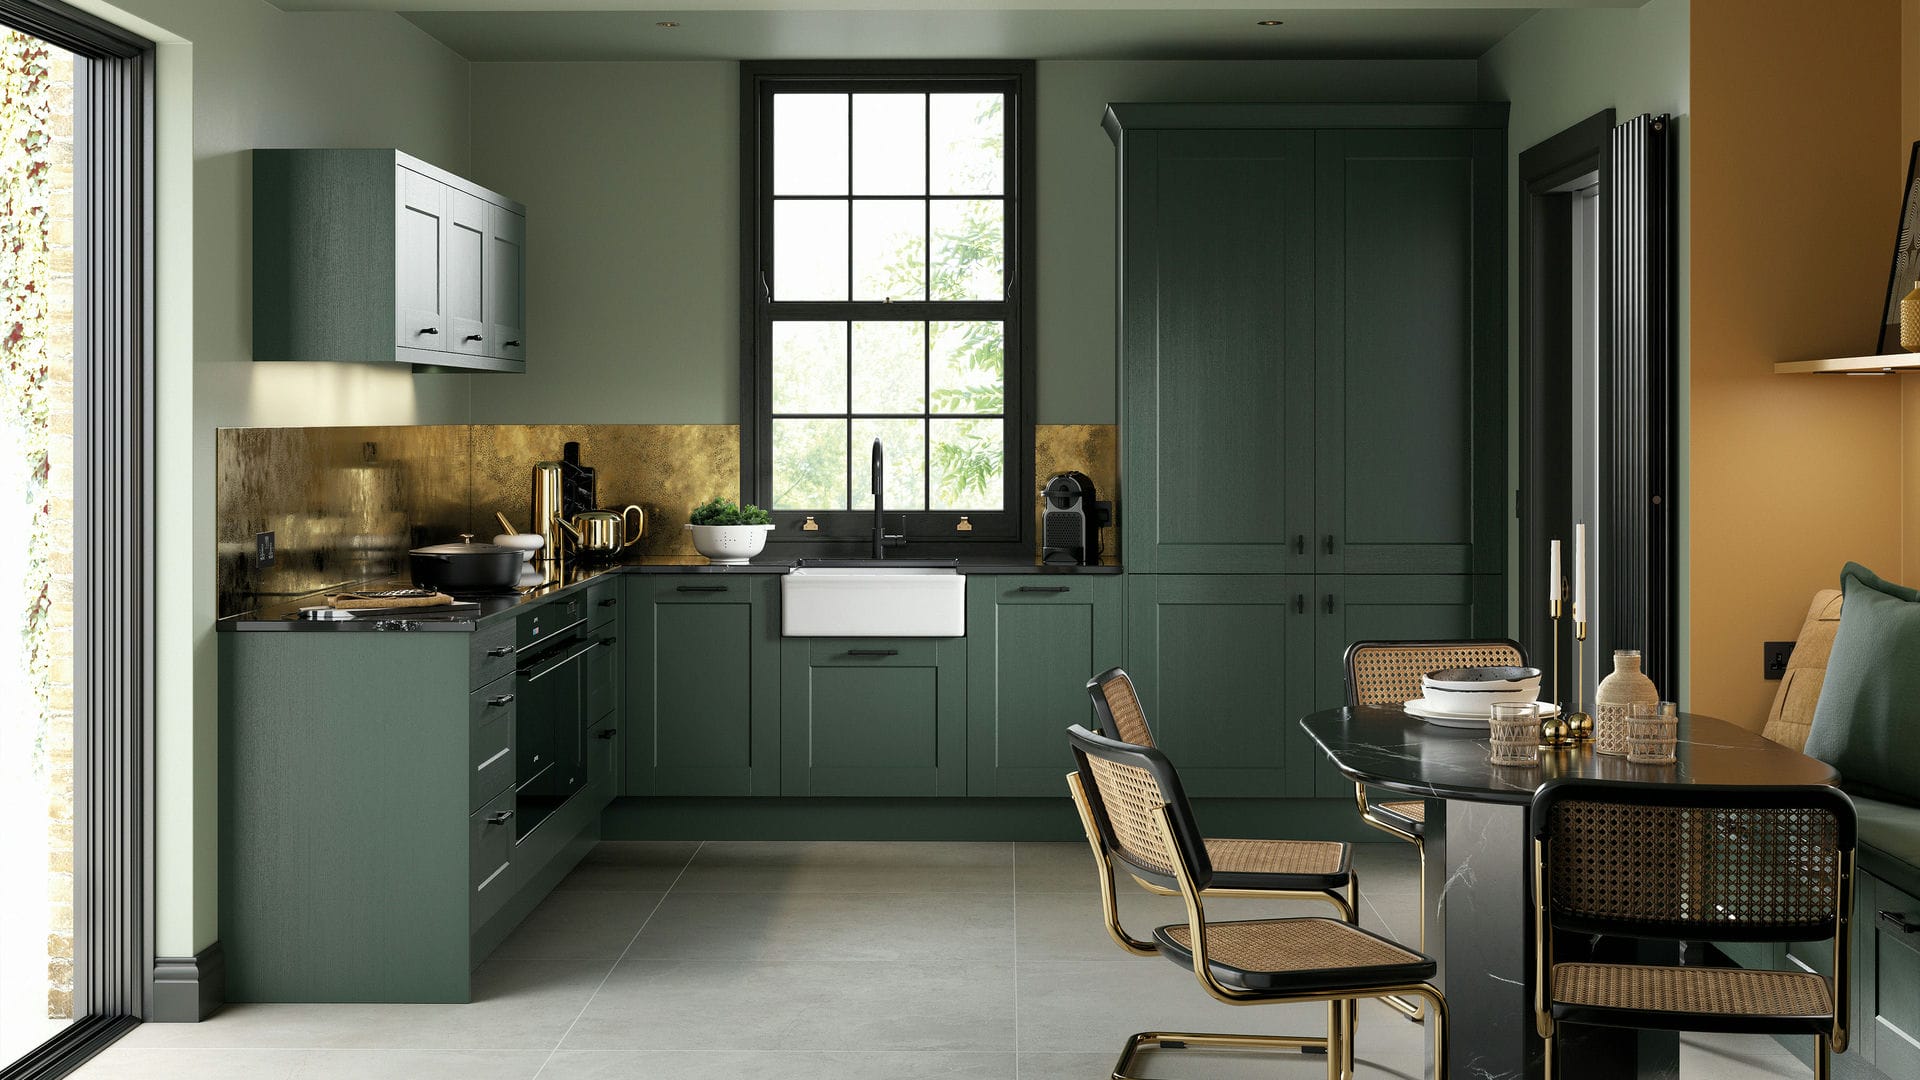 Modern Shaker Heritage Green kitchens updating the classic shaker style with a rich, heritage green shade